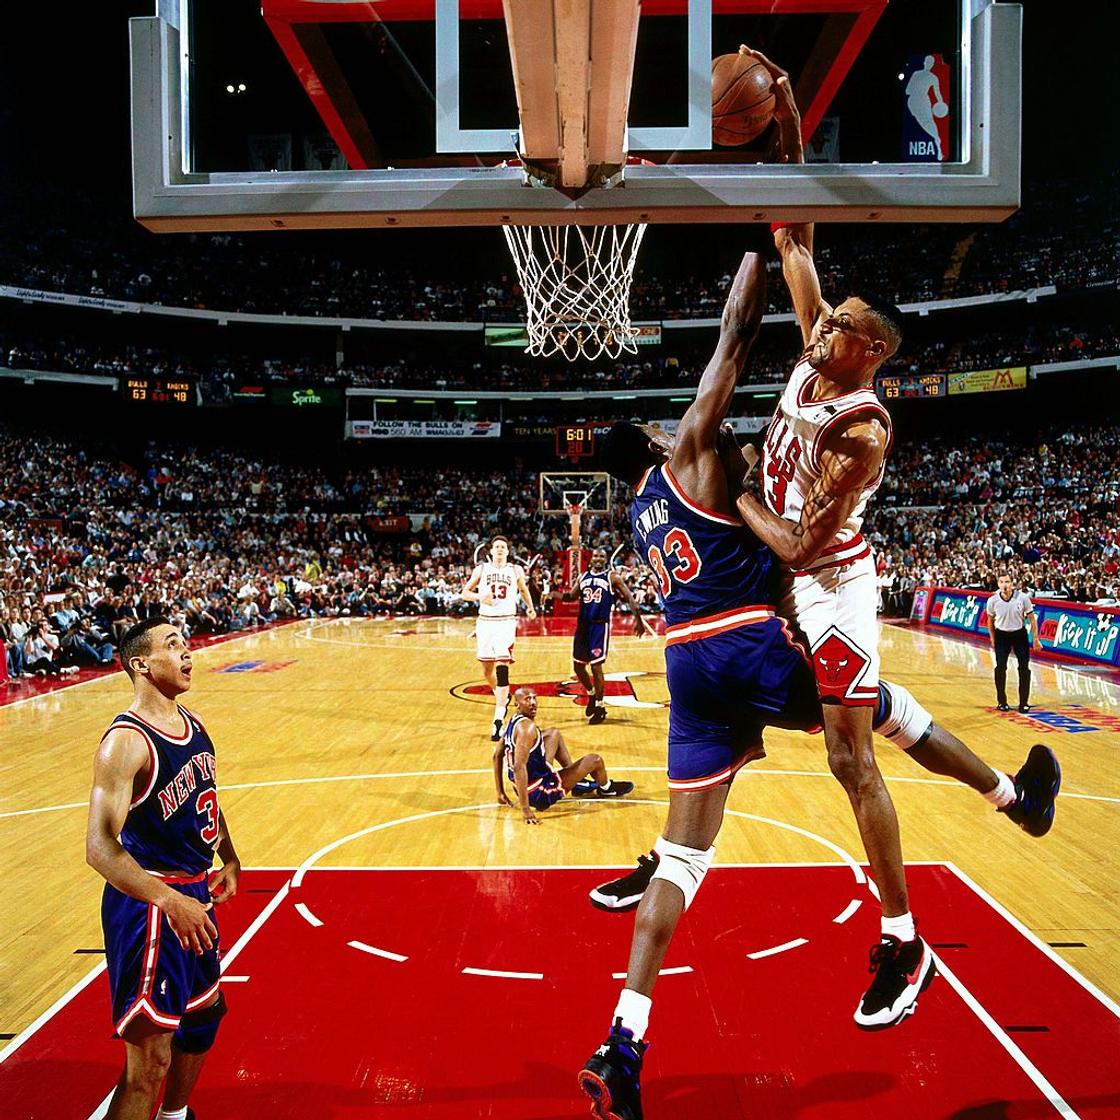 Pippen is one of the best dunkers of all time.